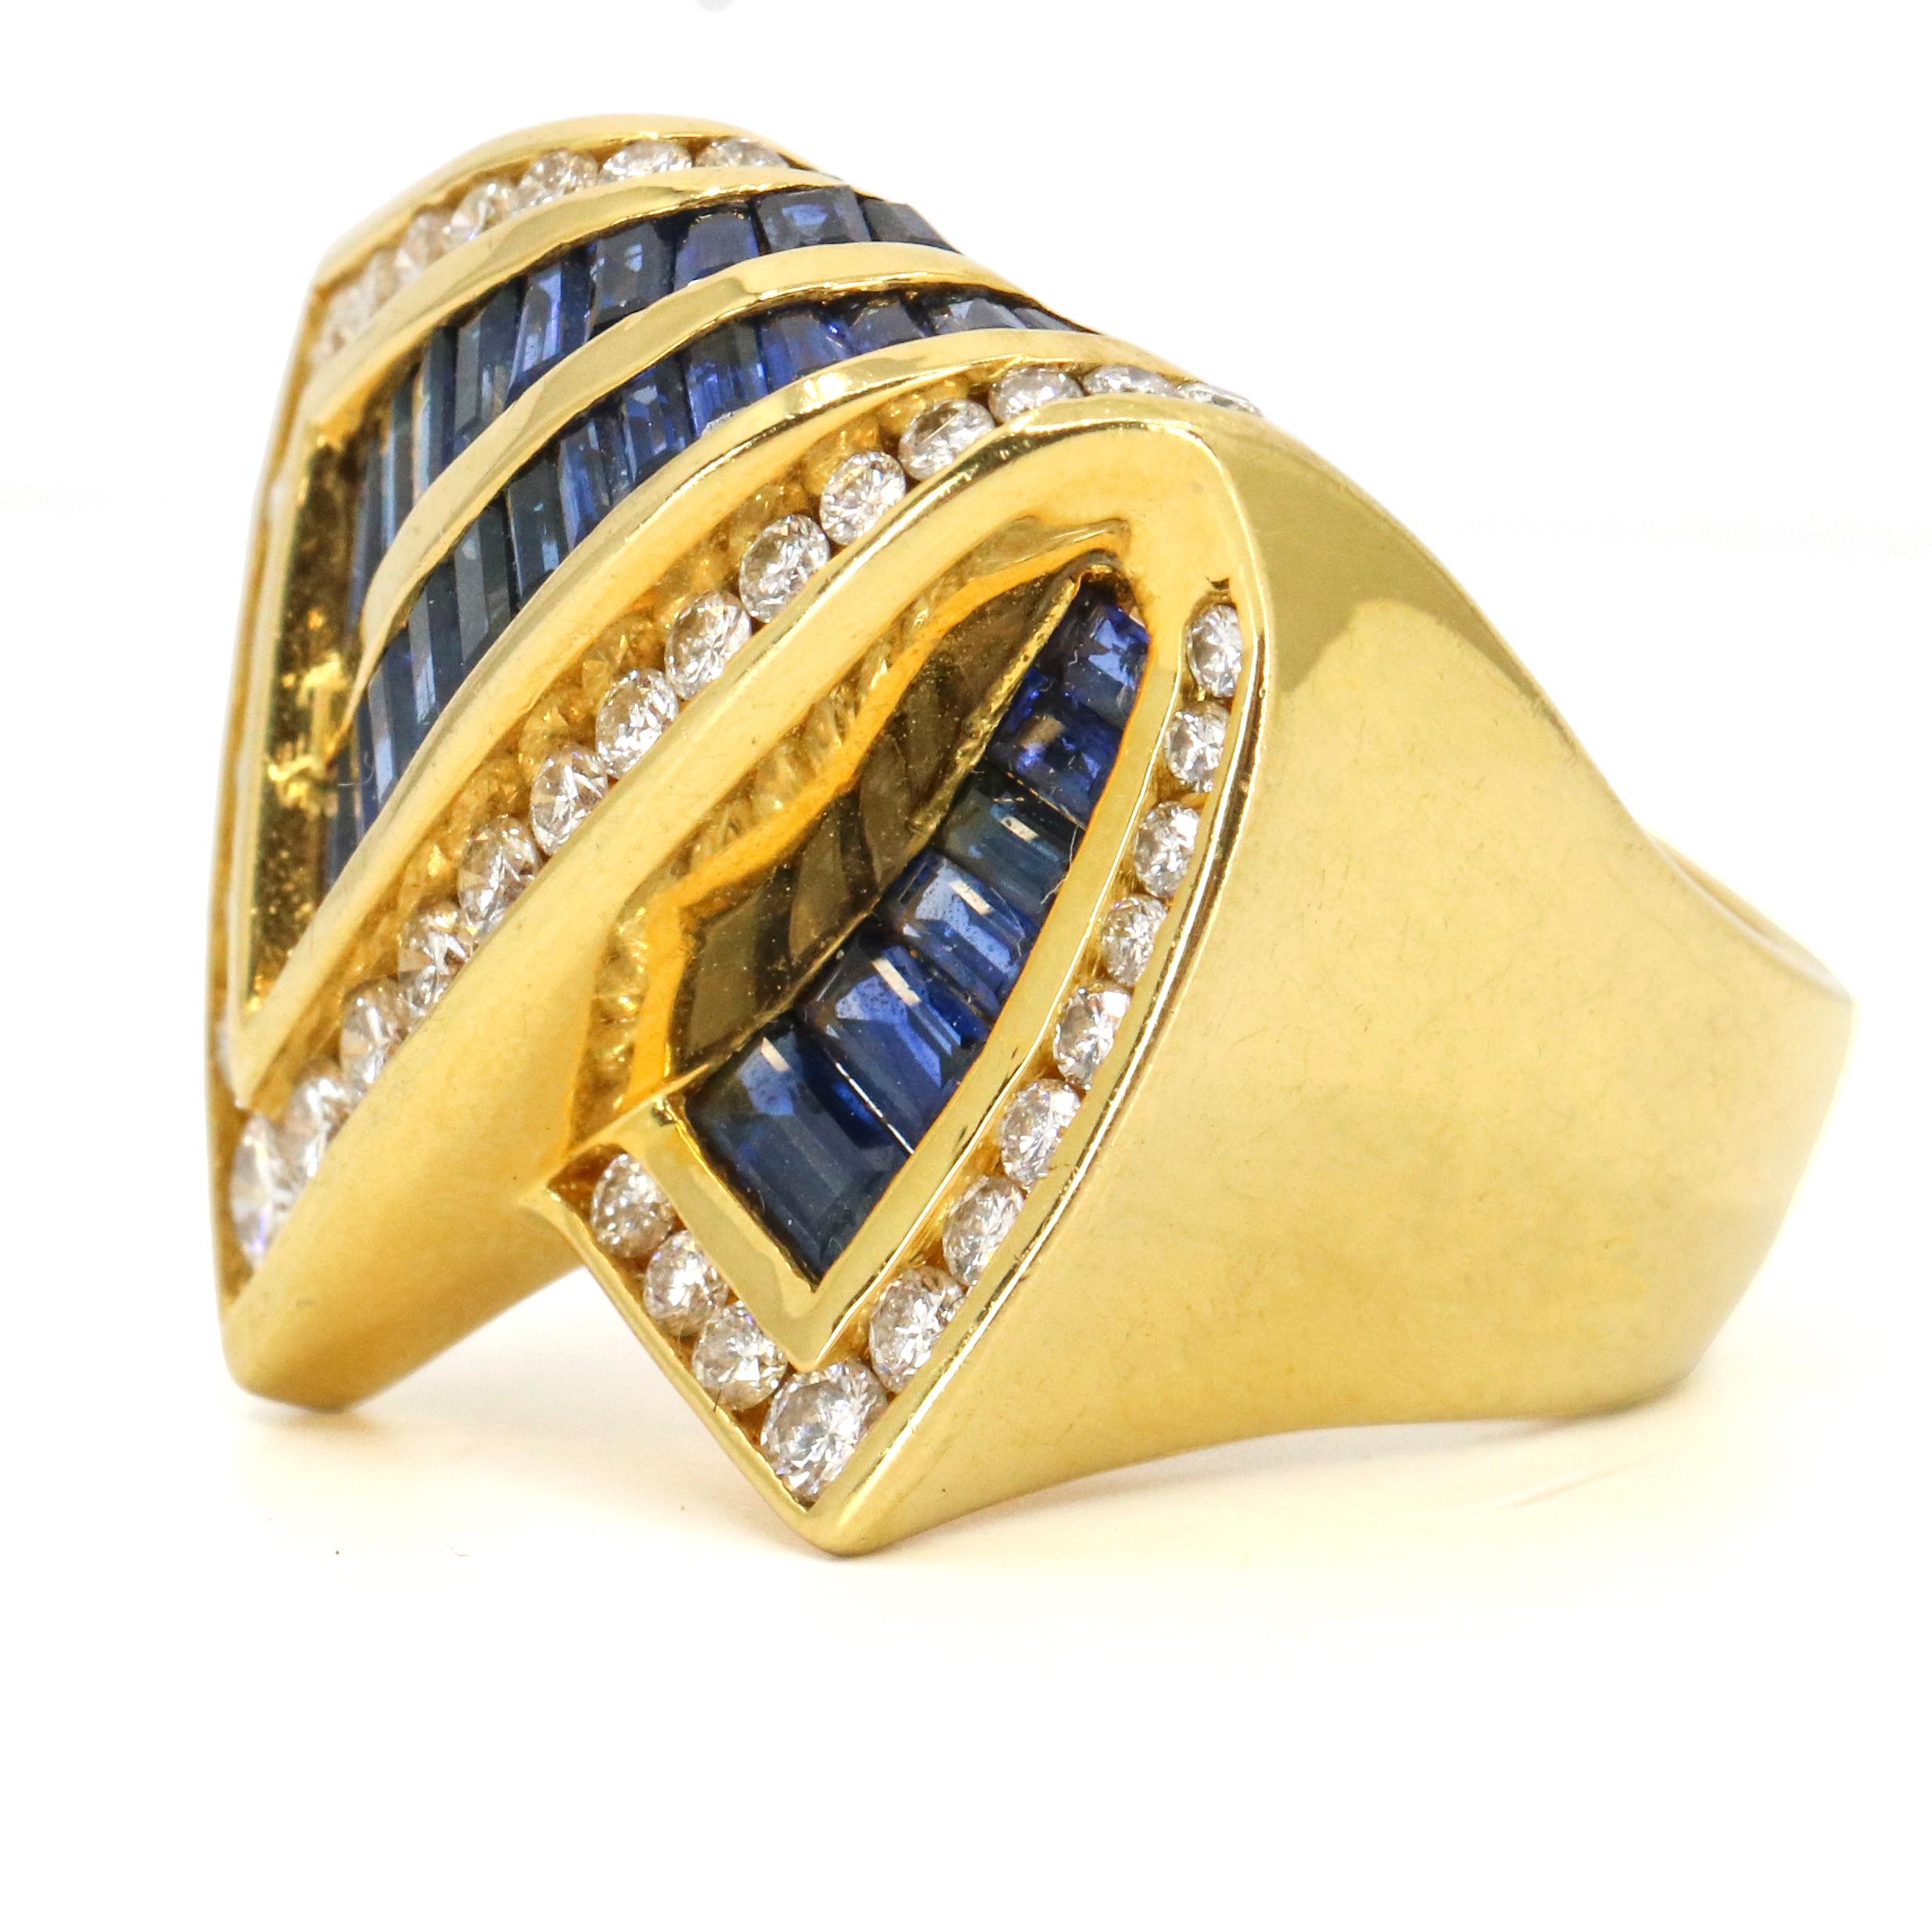 Contemporary Charles Krypell 18 Karat Yellow Gold Sapphire Diamond Ring For Sale